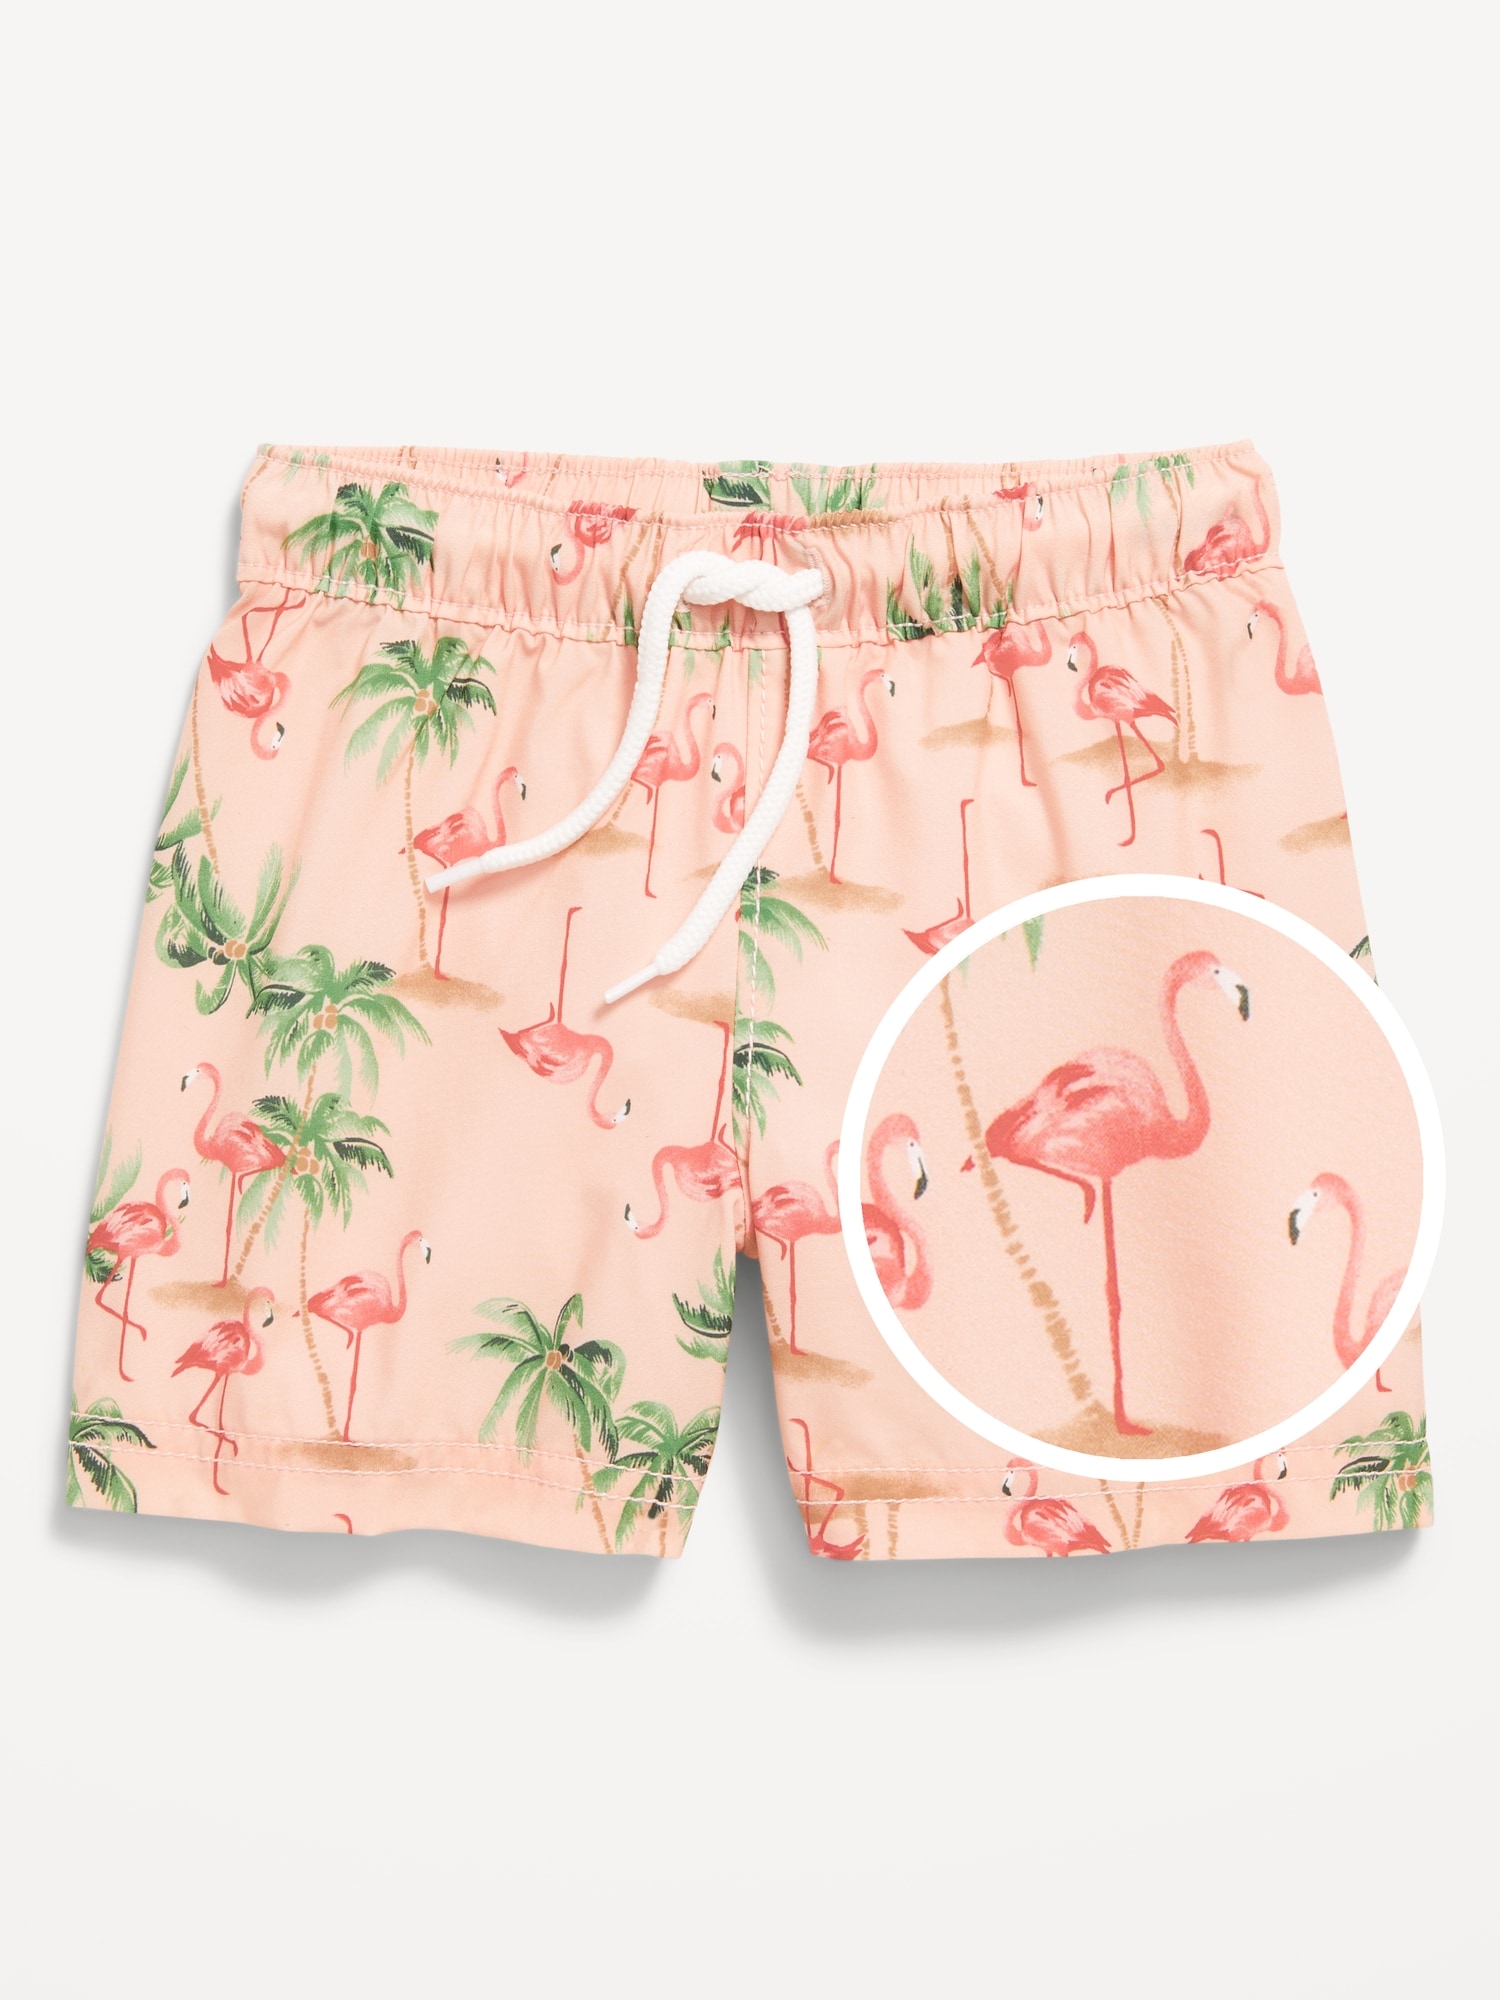 Printed Swim Trunks for Baby Hot Deal